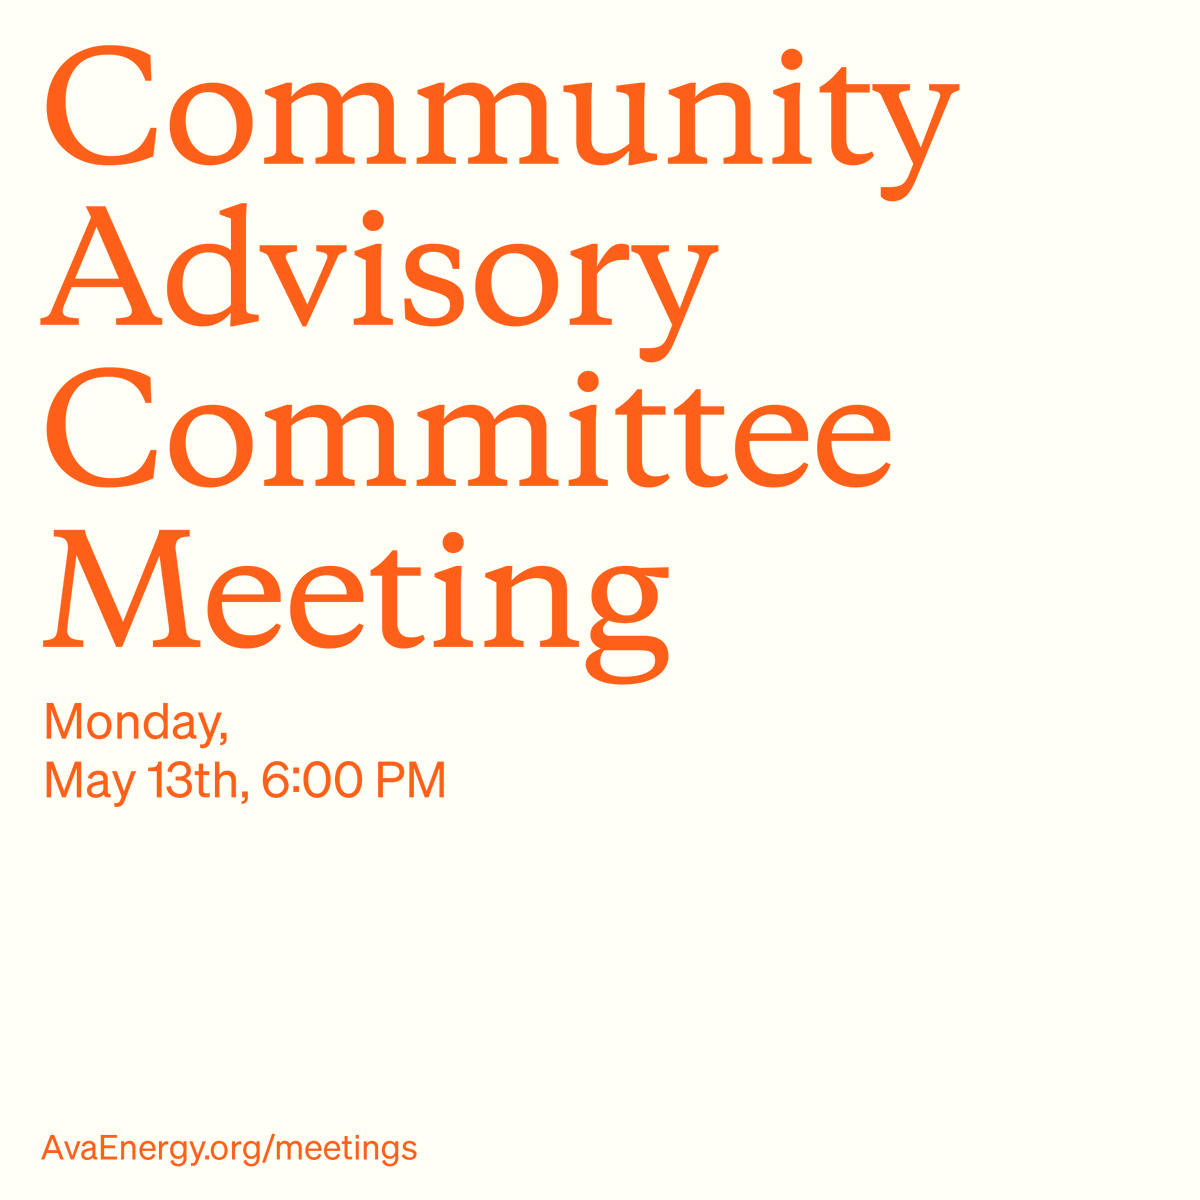 Ava's Community Advisory Committee meets tomorrow, Monday, May 13 at 6pm. Meetings are open to the public and we welcome public comment. This meeting will be held in a hybrid format. Learn more: ow.ly/zrQz50RsKcB